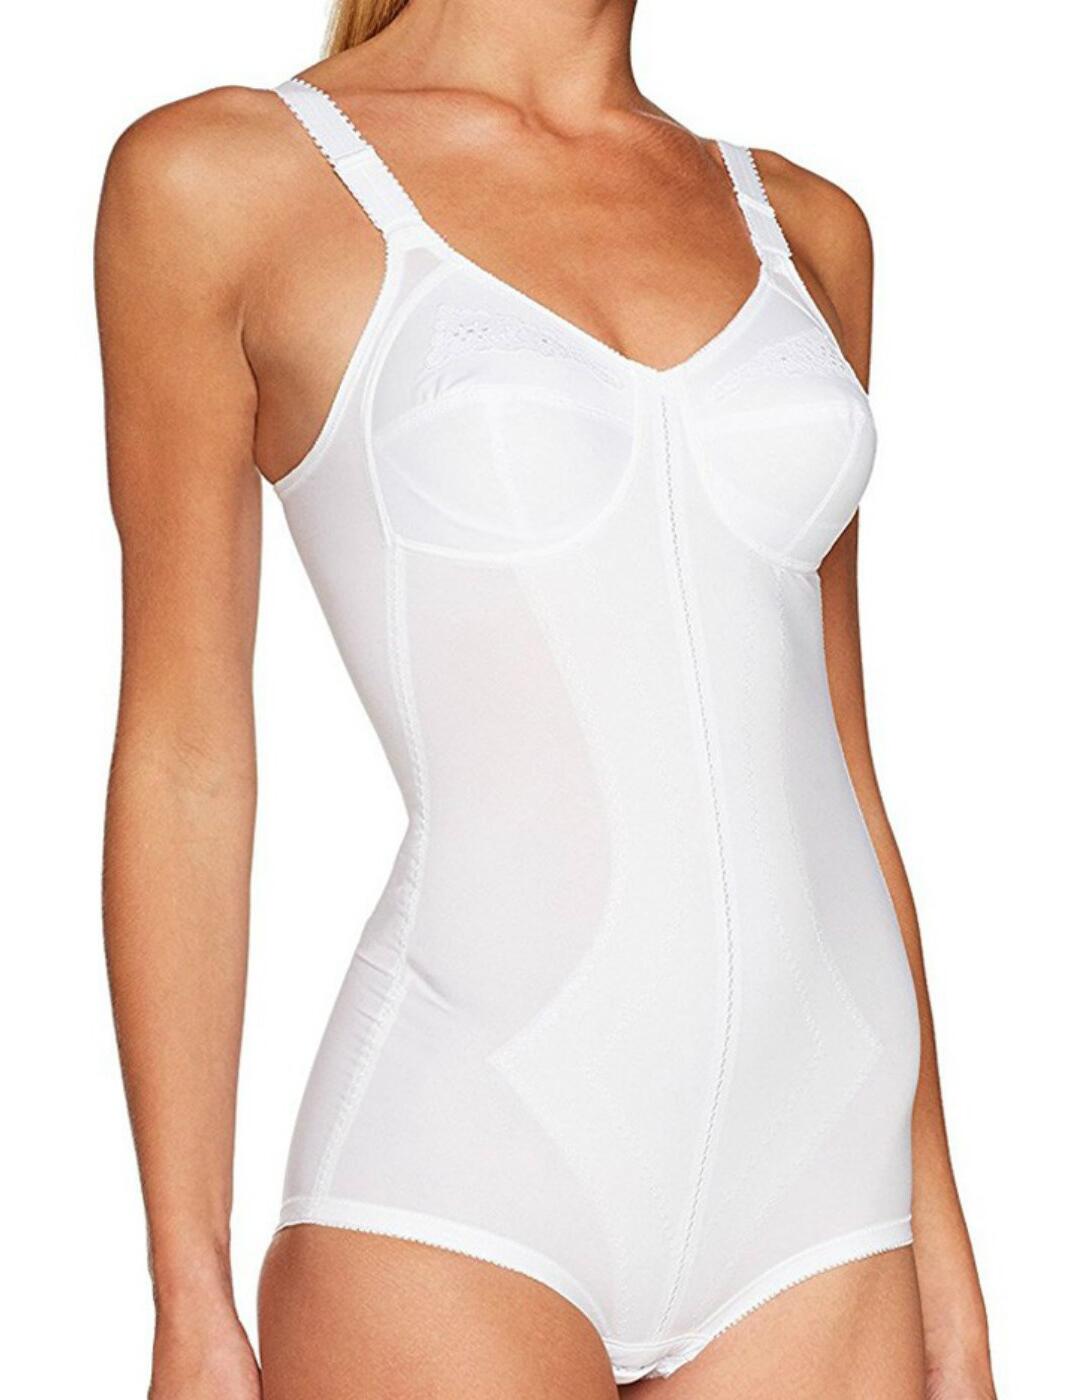 Playtex I Can't Believe It's A Girdle All In One Bodysuit - Belle